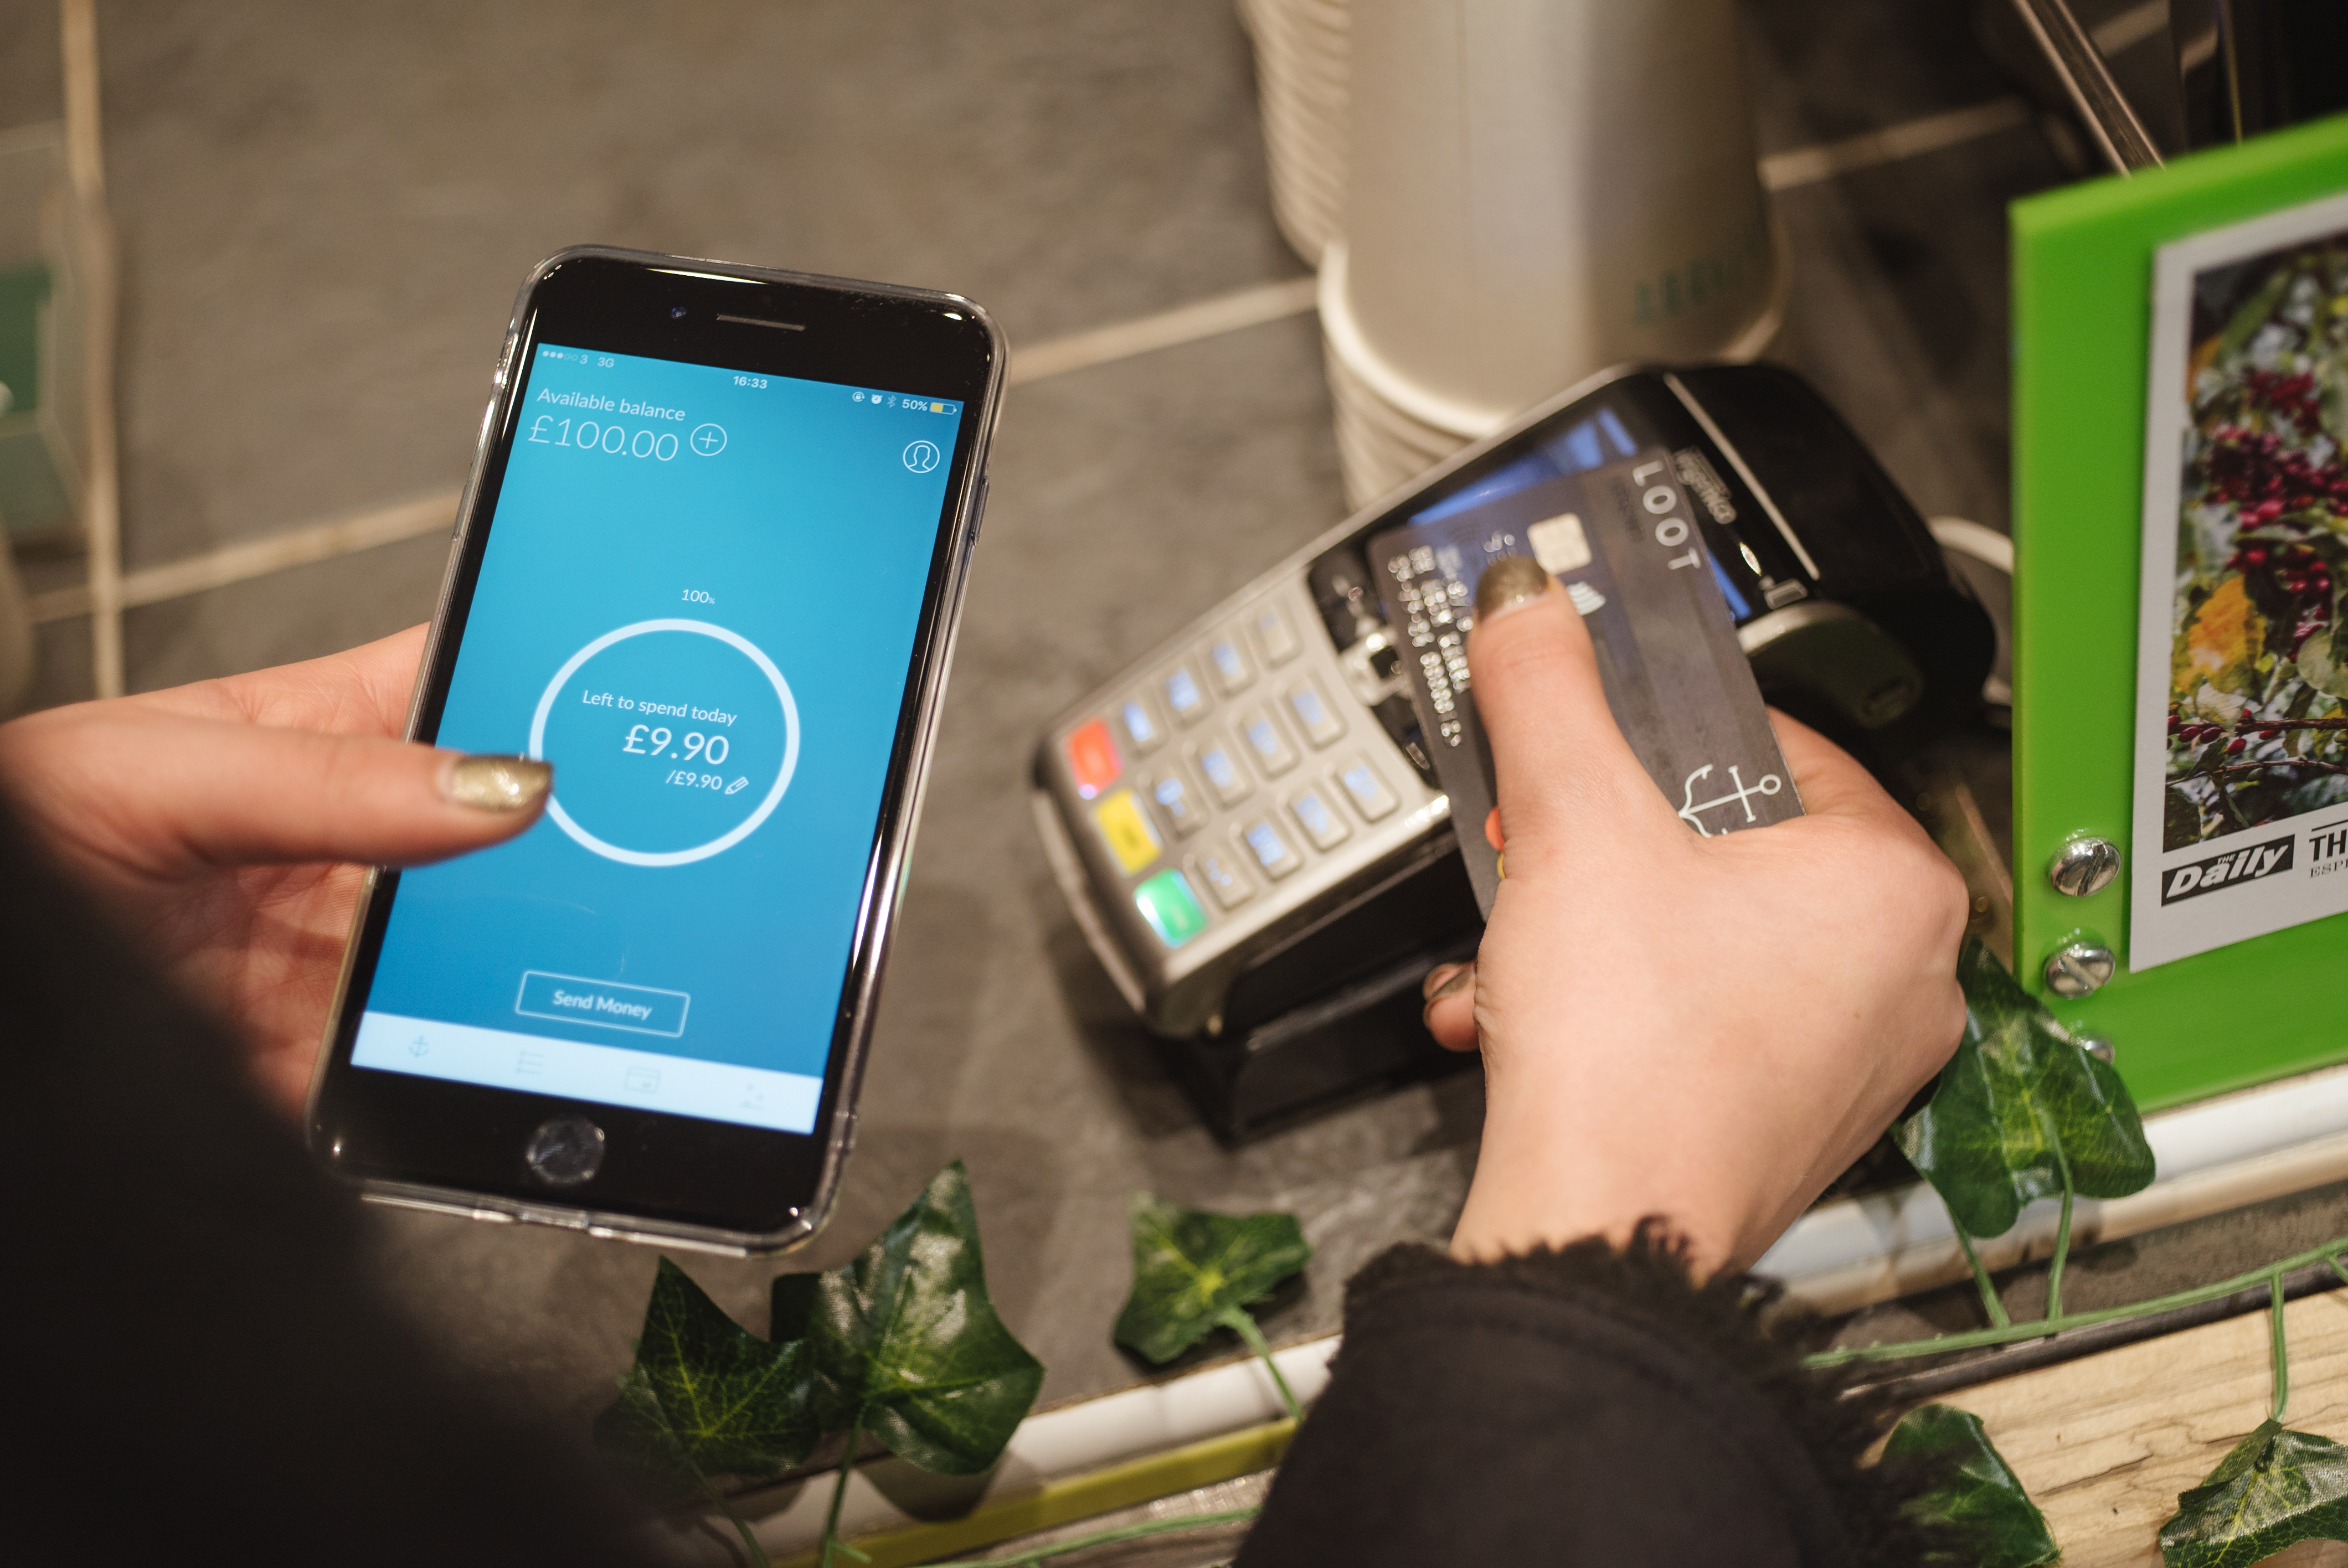 Loot, the digital current account aimed at students and millennials, banks £2.2M Series A